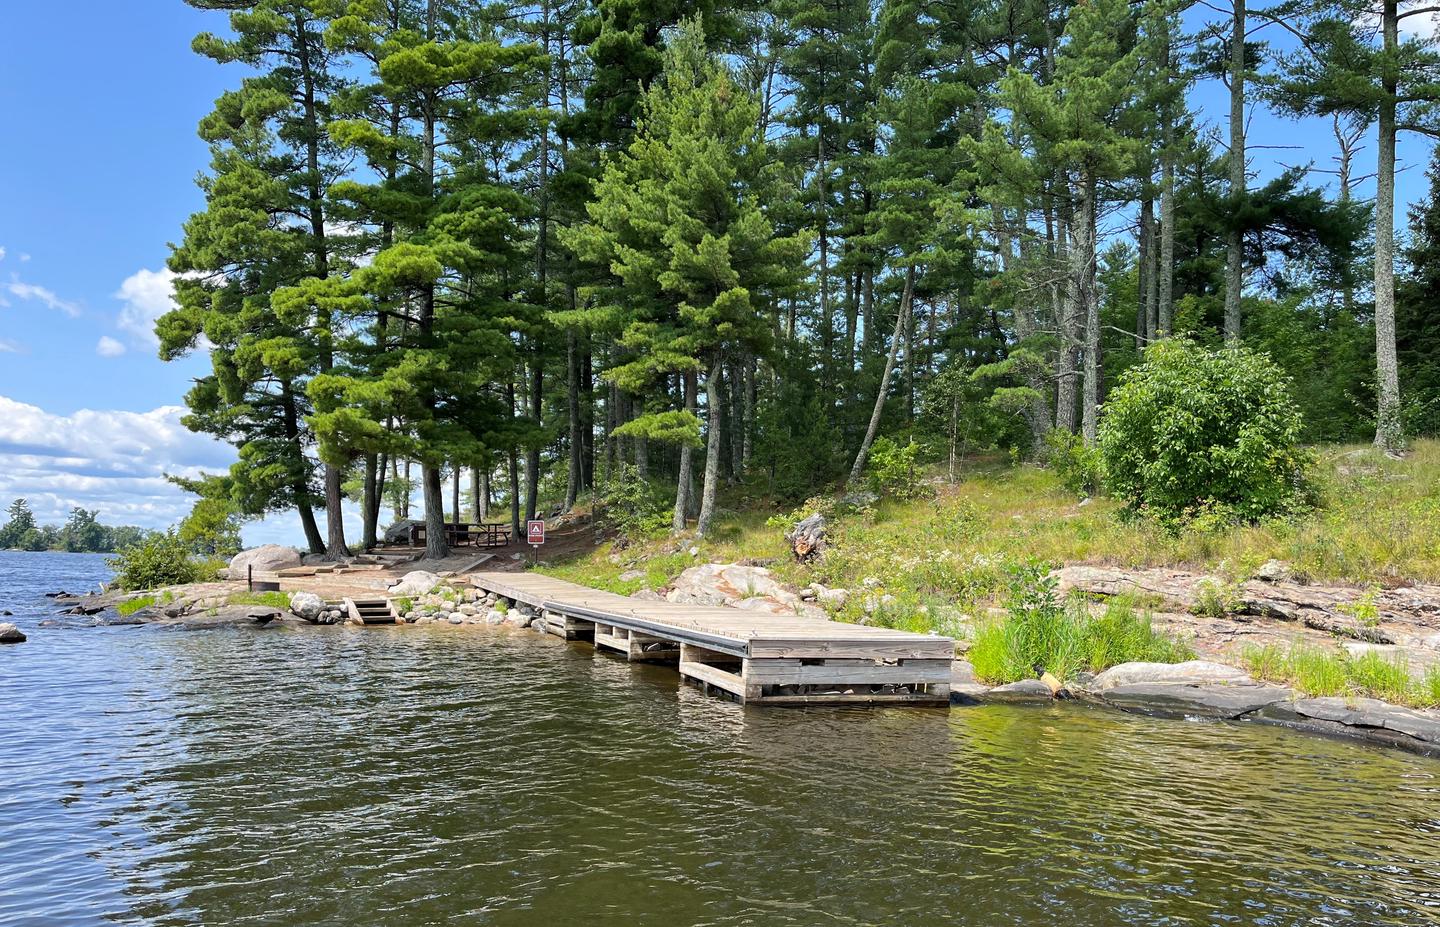 View of dock landing from water with the campsite core in the background.View of dock landing from water